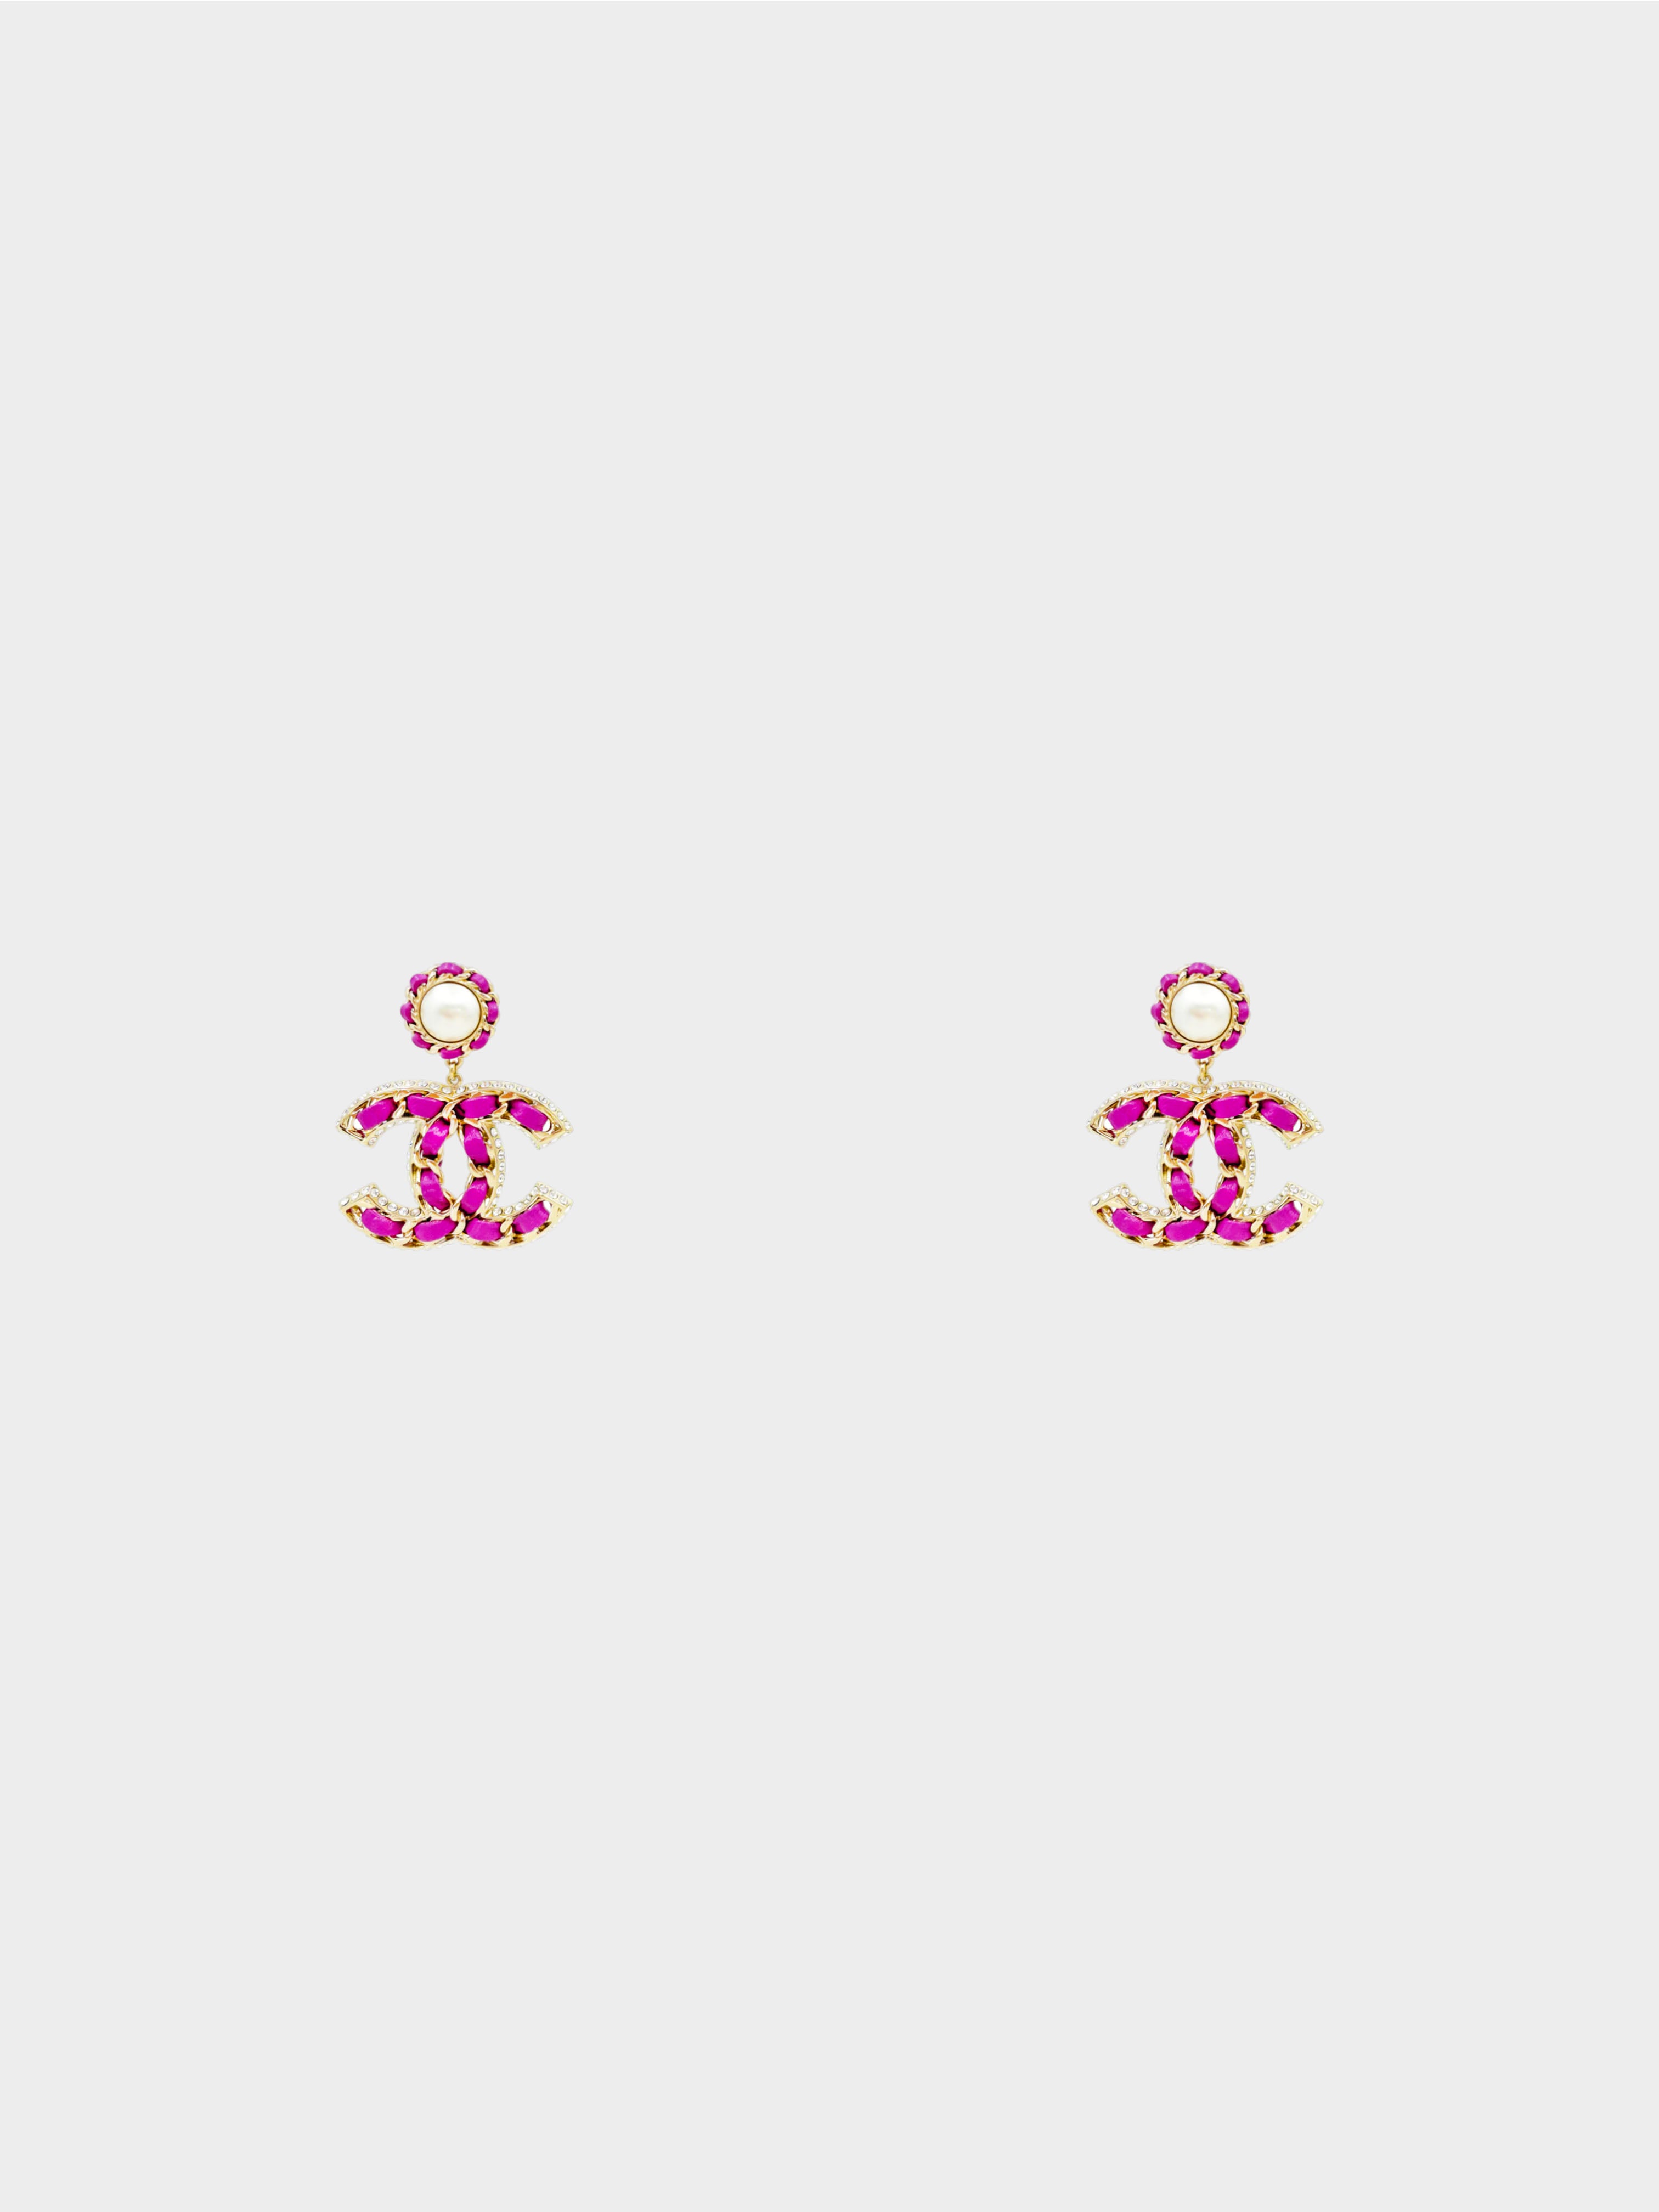 Chanel Spring 2021 Rare Magenta Leather Woven CC Drop Earrings